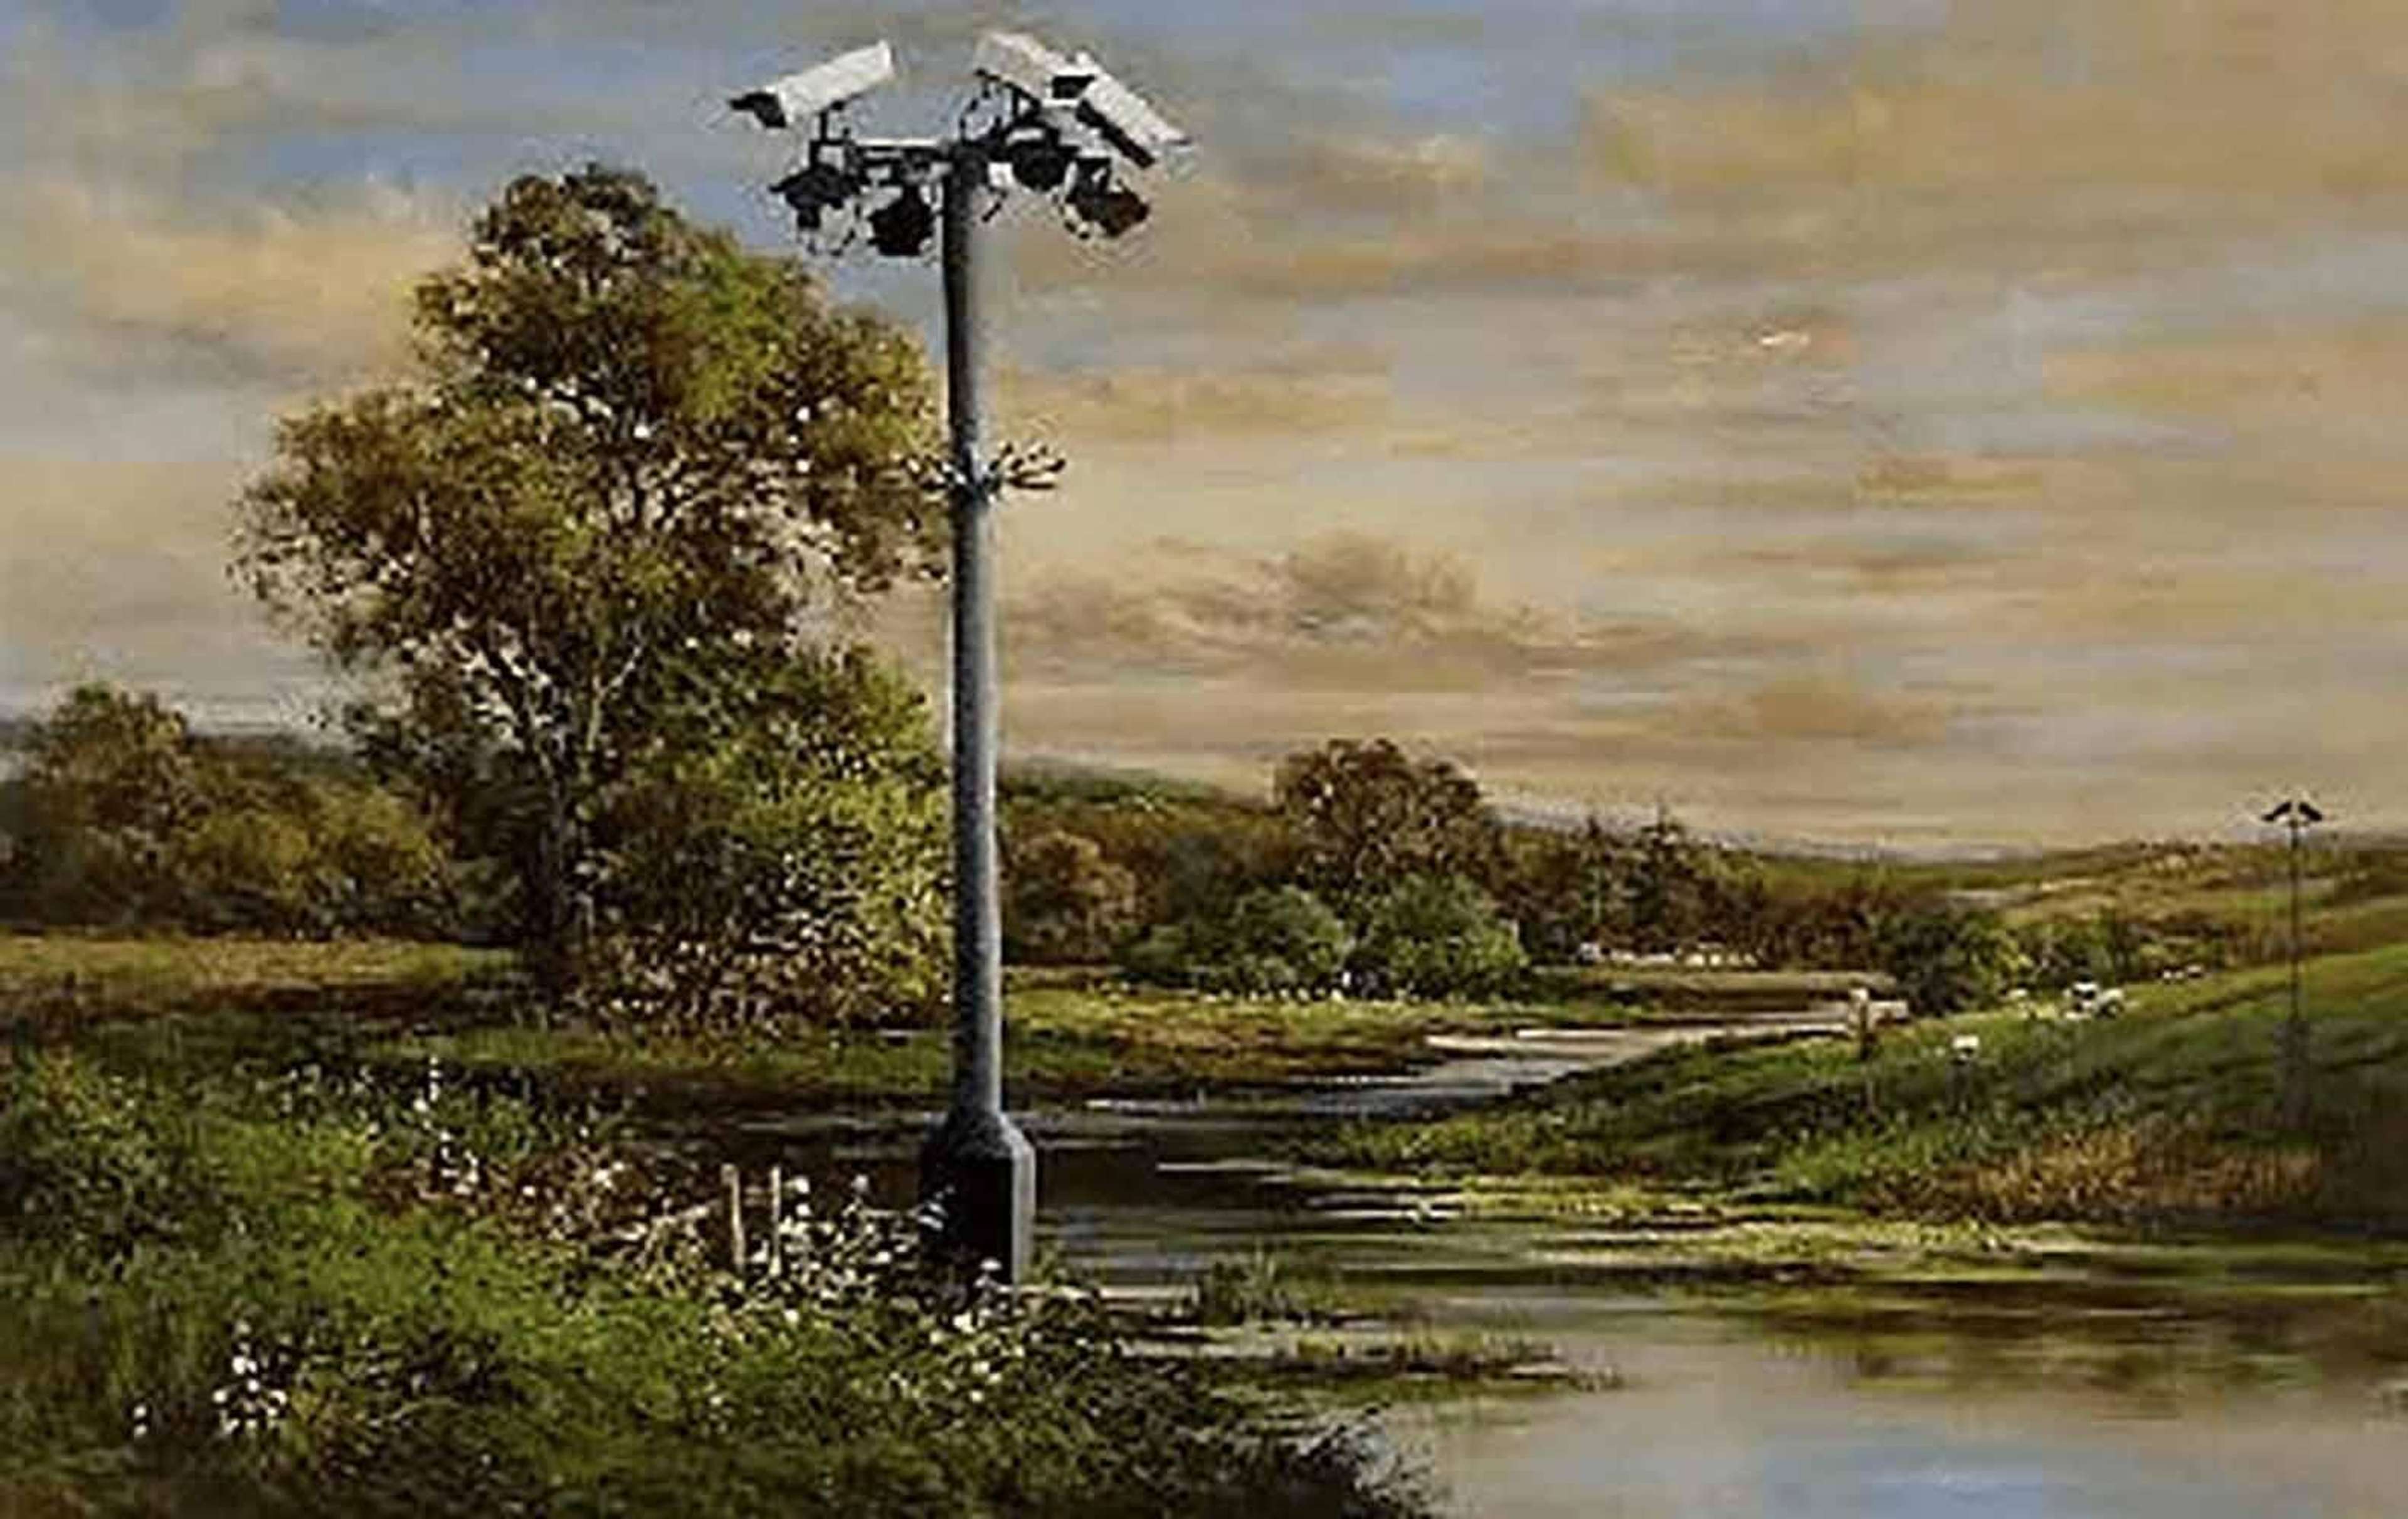 Banksy’s Countryside CCTV, 2006. An oil on canvas work of a surveillance post in the middle of a river in the country.